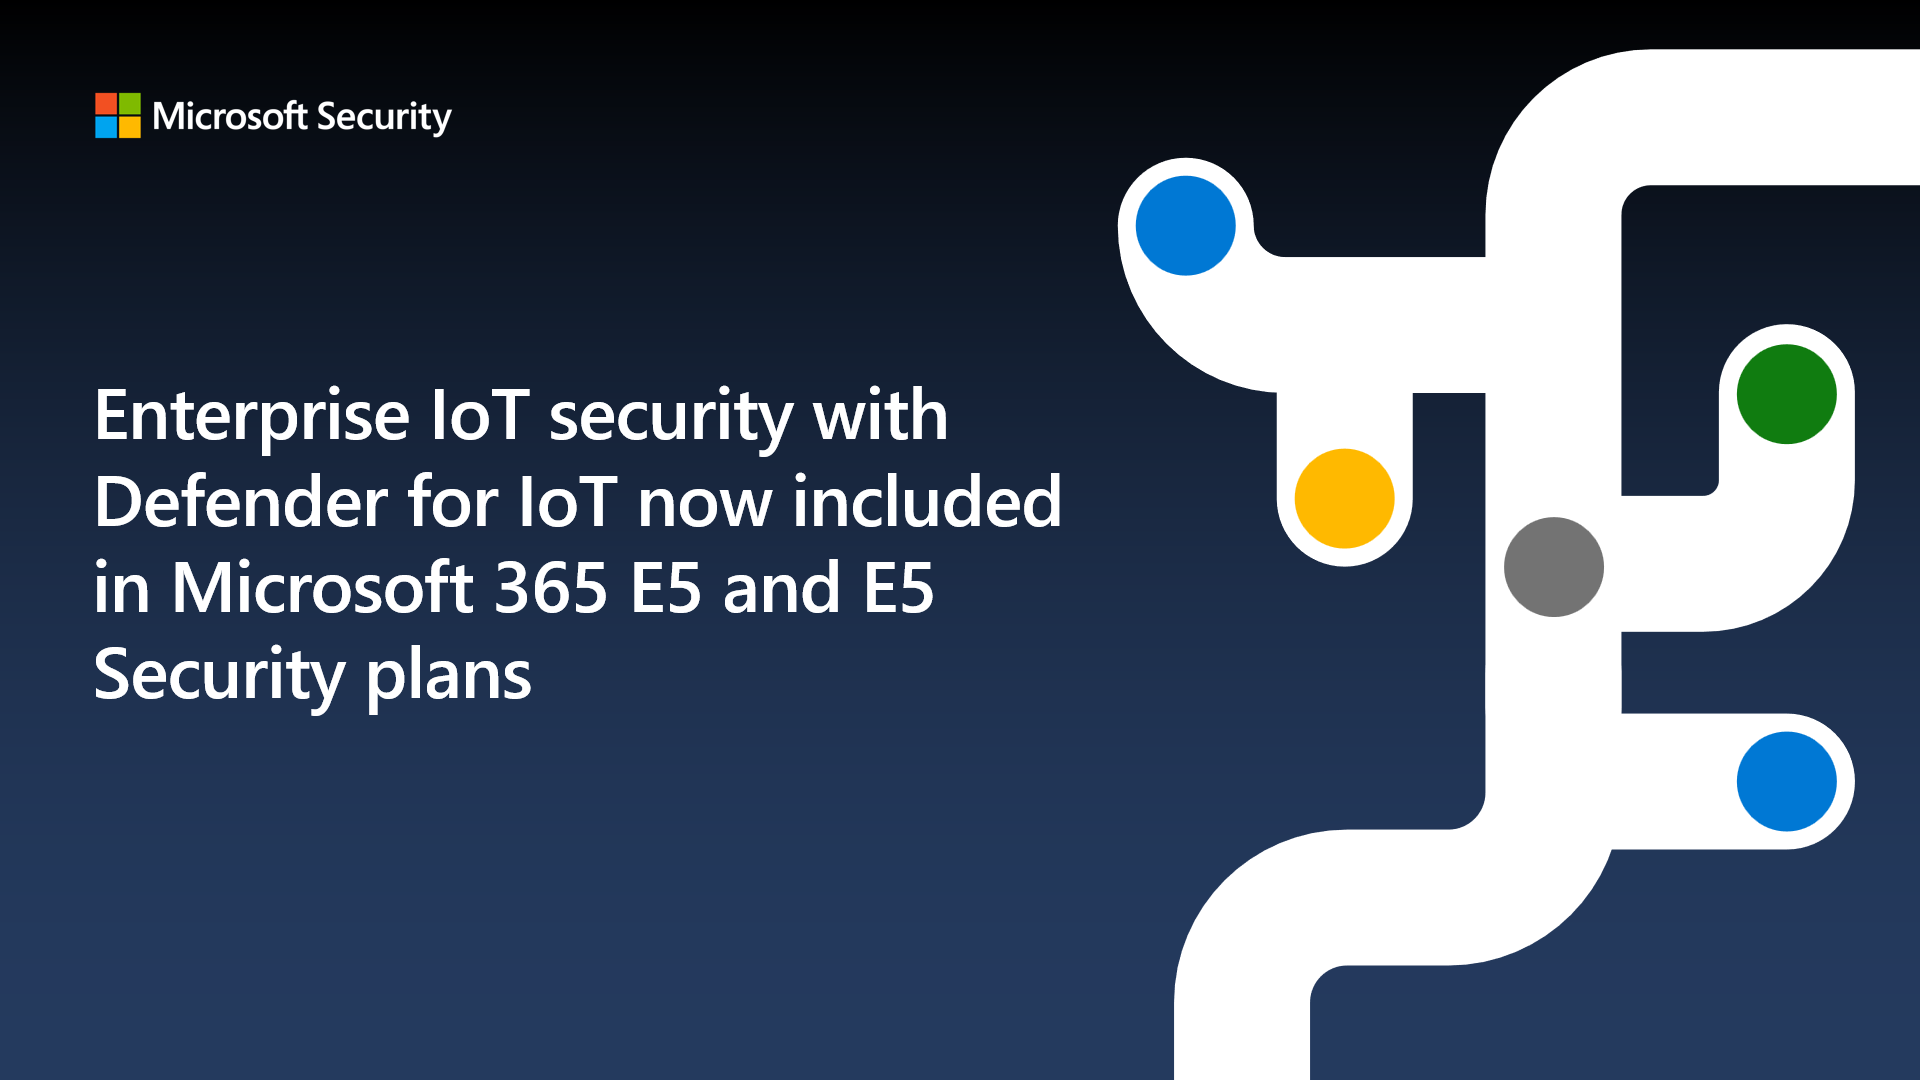 Enterprise IoT security is now included in Microsoft 365 E5 and E5 Security plans